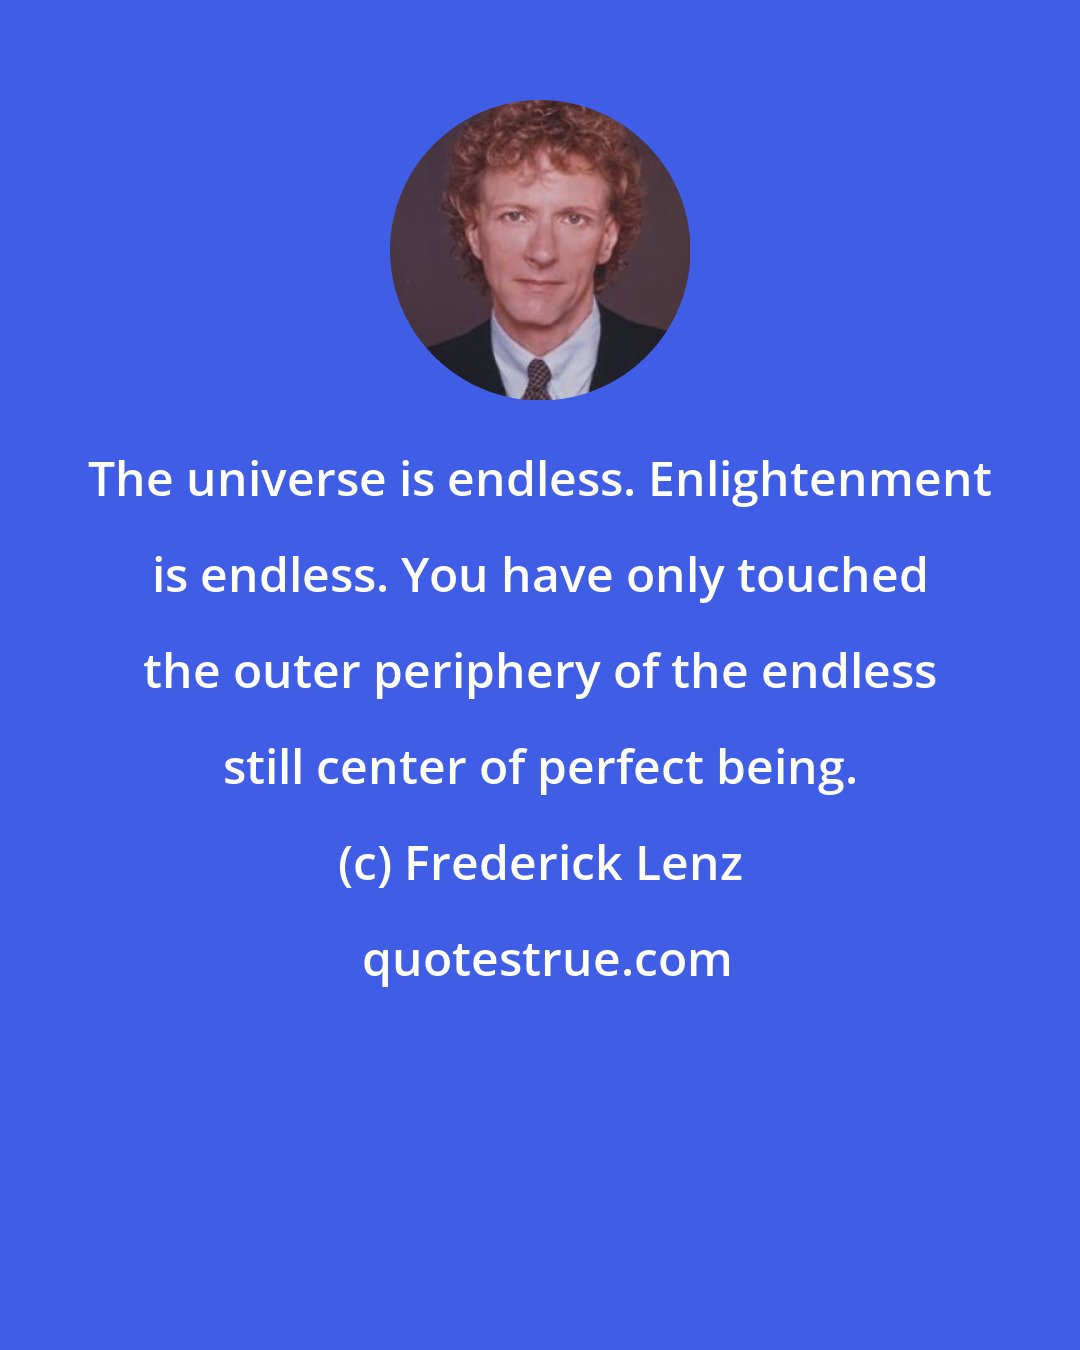 Frederick Lenz: The universe is endless. Enlightenment is endless. You have only touched the outer periphery of the endless still center of perfect being.